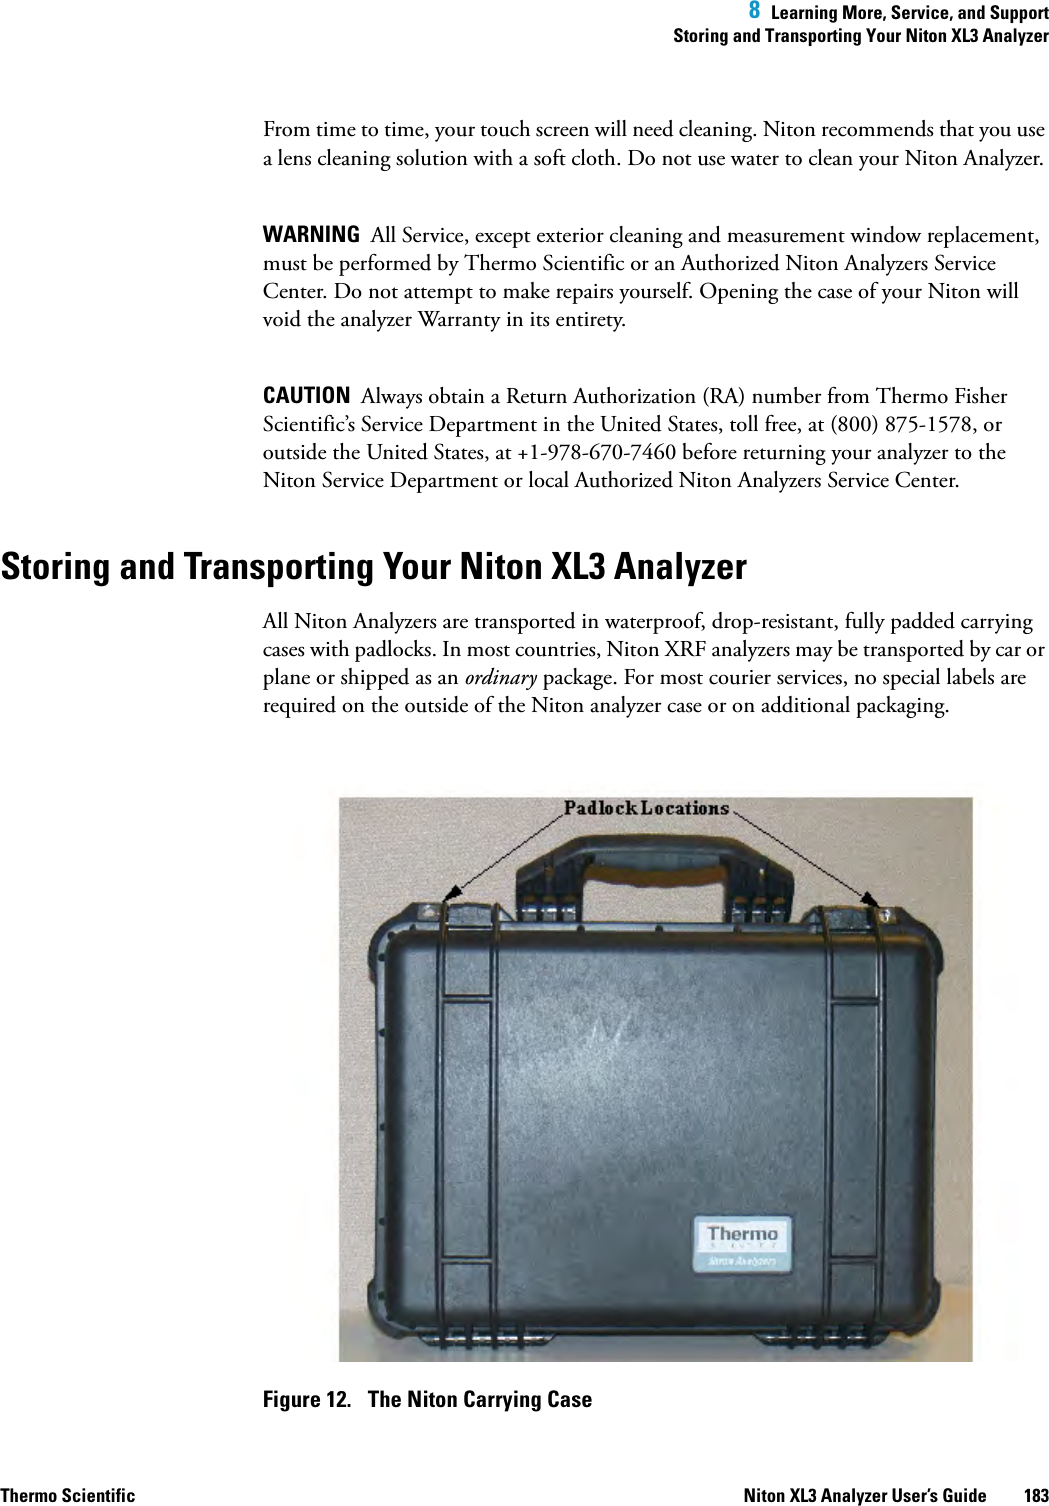  8  Learning More, Service, and SupportStoring and Transporting Your Niton XL3 AnalyzerThermo Scientific Niton XL3 Analyzer User’s Guide 183From time to time, your touch screen will need cleaning. Niton recommends that you use a lens cleaning solution with a soft cloth. Do not use water to clean your Niton Analyzer. WARNING  All Service, except exterior cleaning and measurement window replacement, must be performed by Thermo Scientific or an Authorized Niton Analyzers Service Center. Do not attempt to make repairs yourself. Opening the case of your Niton will void the analyzer Warranty in its entirety.CAUTION  Always obtain a Return Authorization (RA) number from Thermo Fisher Scientific’s Service Department in the United States, toll free, at (800) 875-1578, or outside the United States, at +1-978-670-7460 before returning your analyzer to the Niton Service Department or local Authorized Niton Analyzers Service Center.Storing and Transporting Your Niton XL3 AnalyzerAll Niton Analyzers are transported in waterproof, drop-resistant, fully padded carrying cases with padlocks. In most countries, Niton XRF analyzers may be transported by car or plane or shipped as an ordinary package. For most courier services, no special labels are required on the outside of the Niton analyzer case or on additional packaging.Figure 12.  The Niton Carrying Case